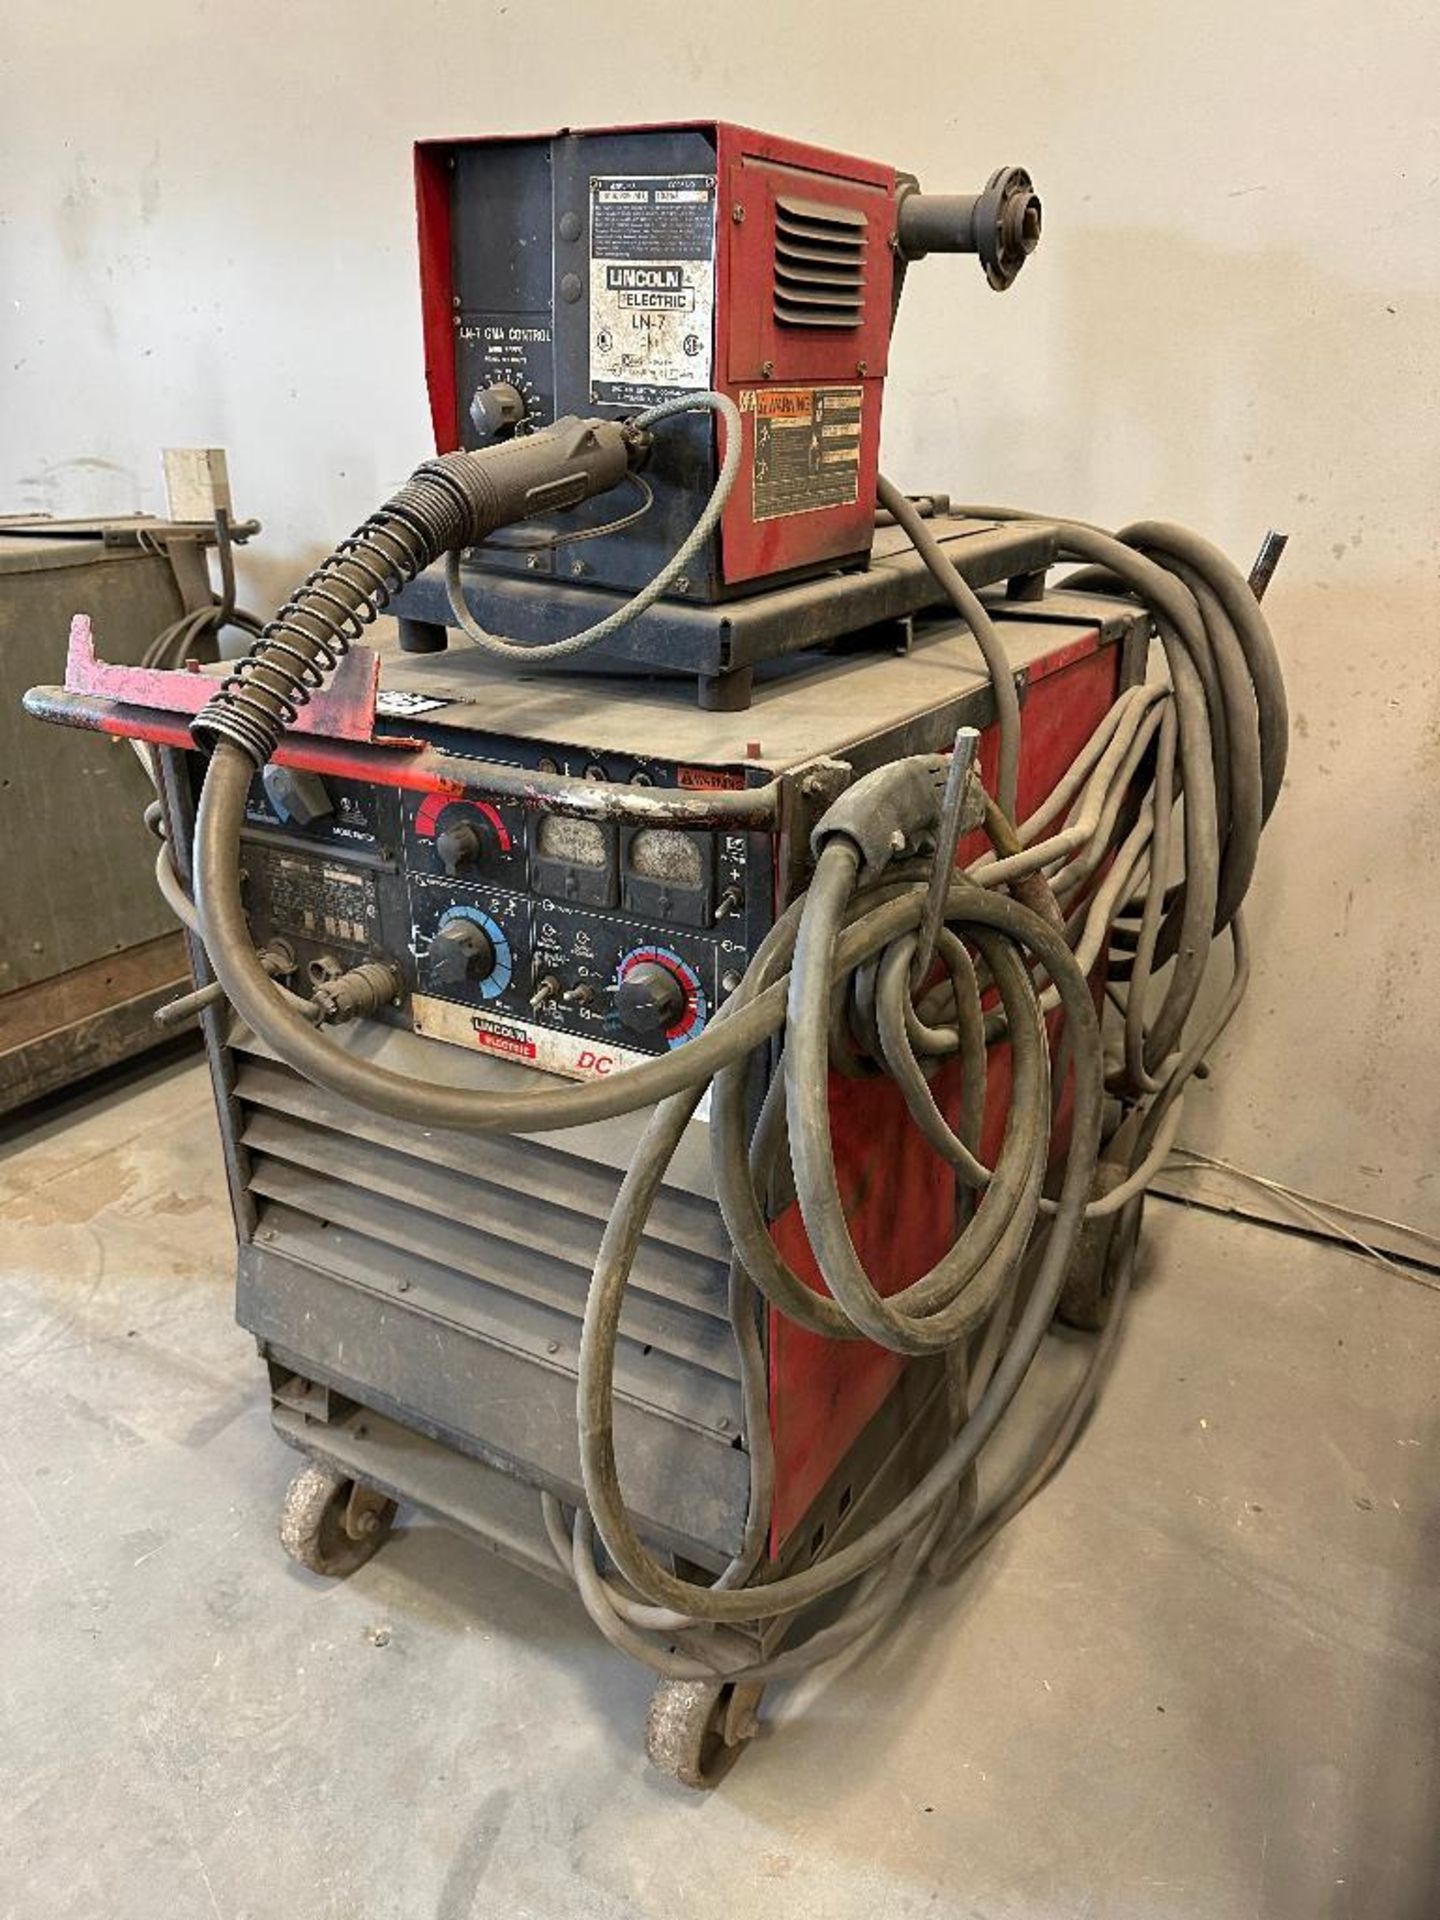 Lot of Lincoln Electric DC-400 Welder, Lincoln Electric LN-7 Wire Feeder, Bernard Gun, Cords, Cart, - Image 3 of 6